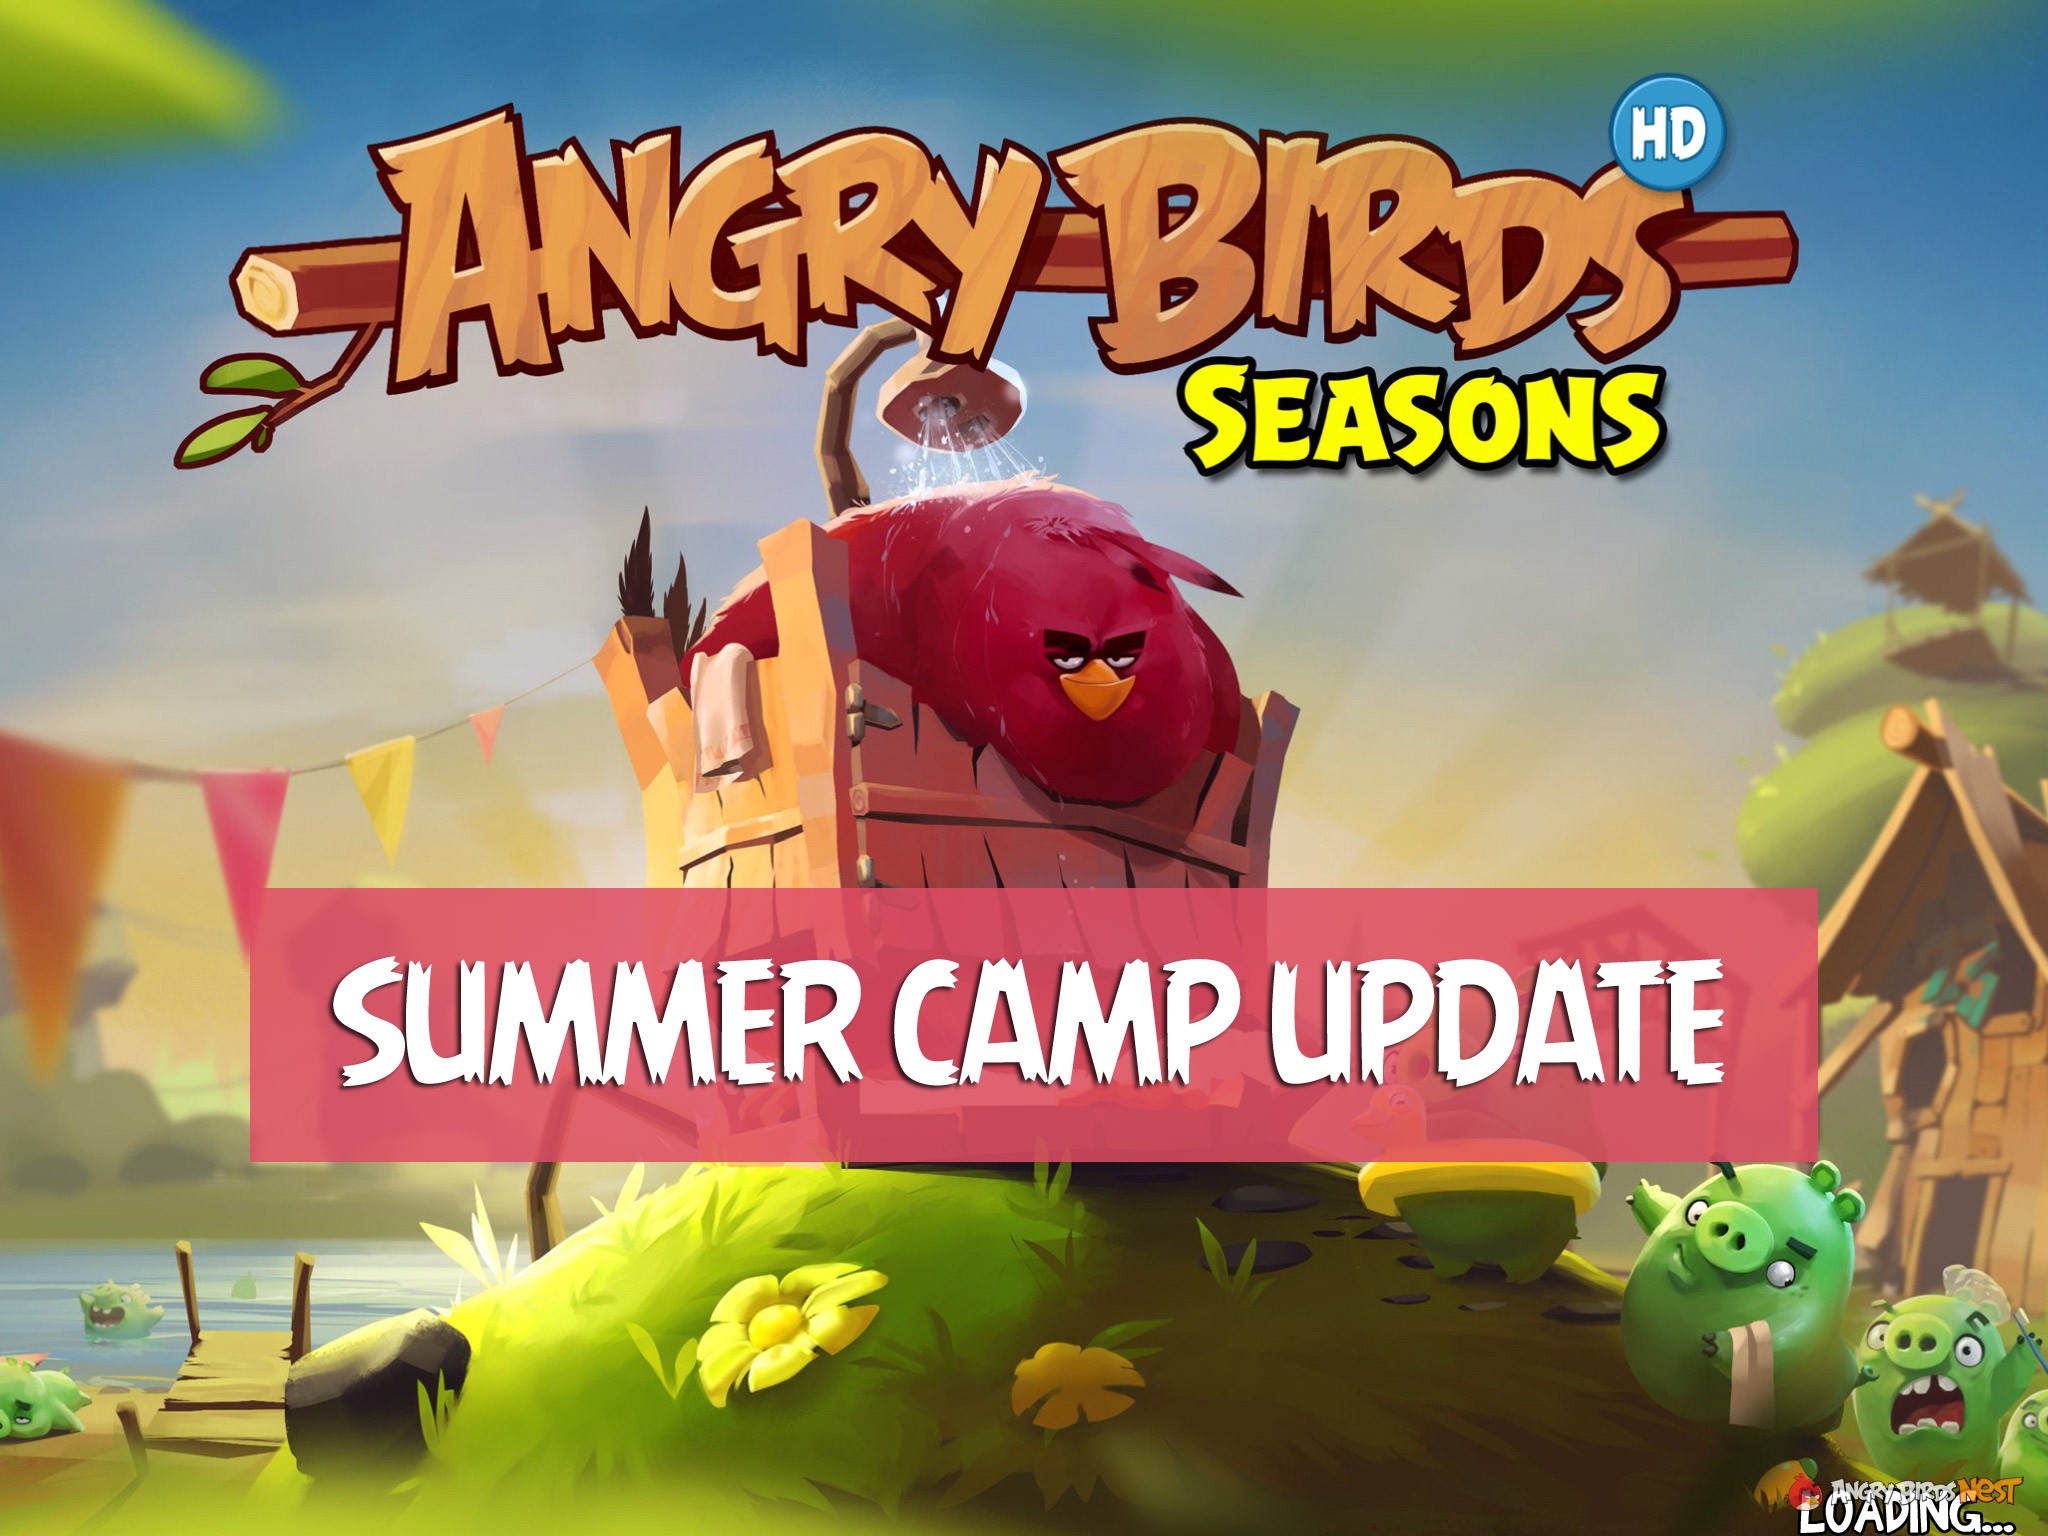 Angry Birds: Seasons Backgrounds, Compatible - PC, Mobile, Gadgets| 2048x1536 px